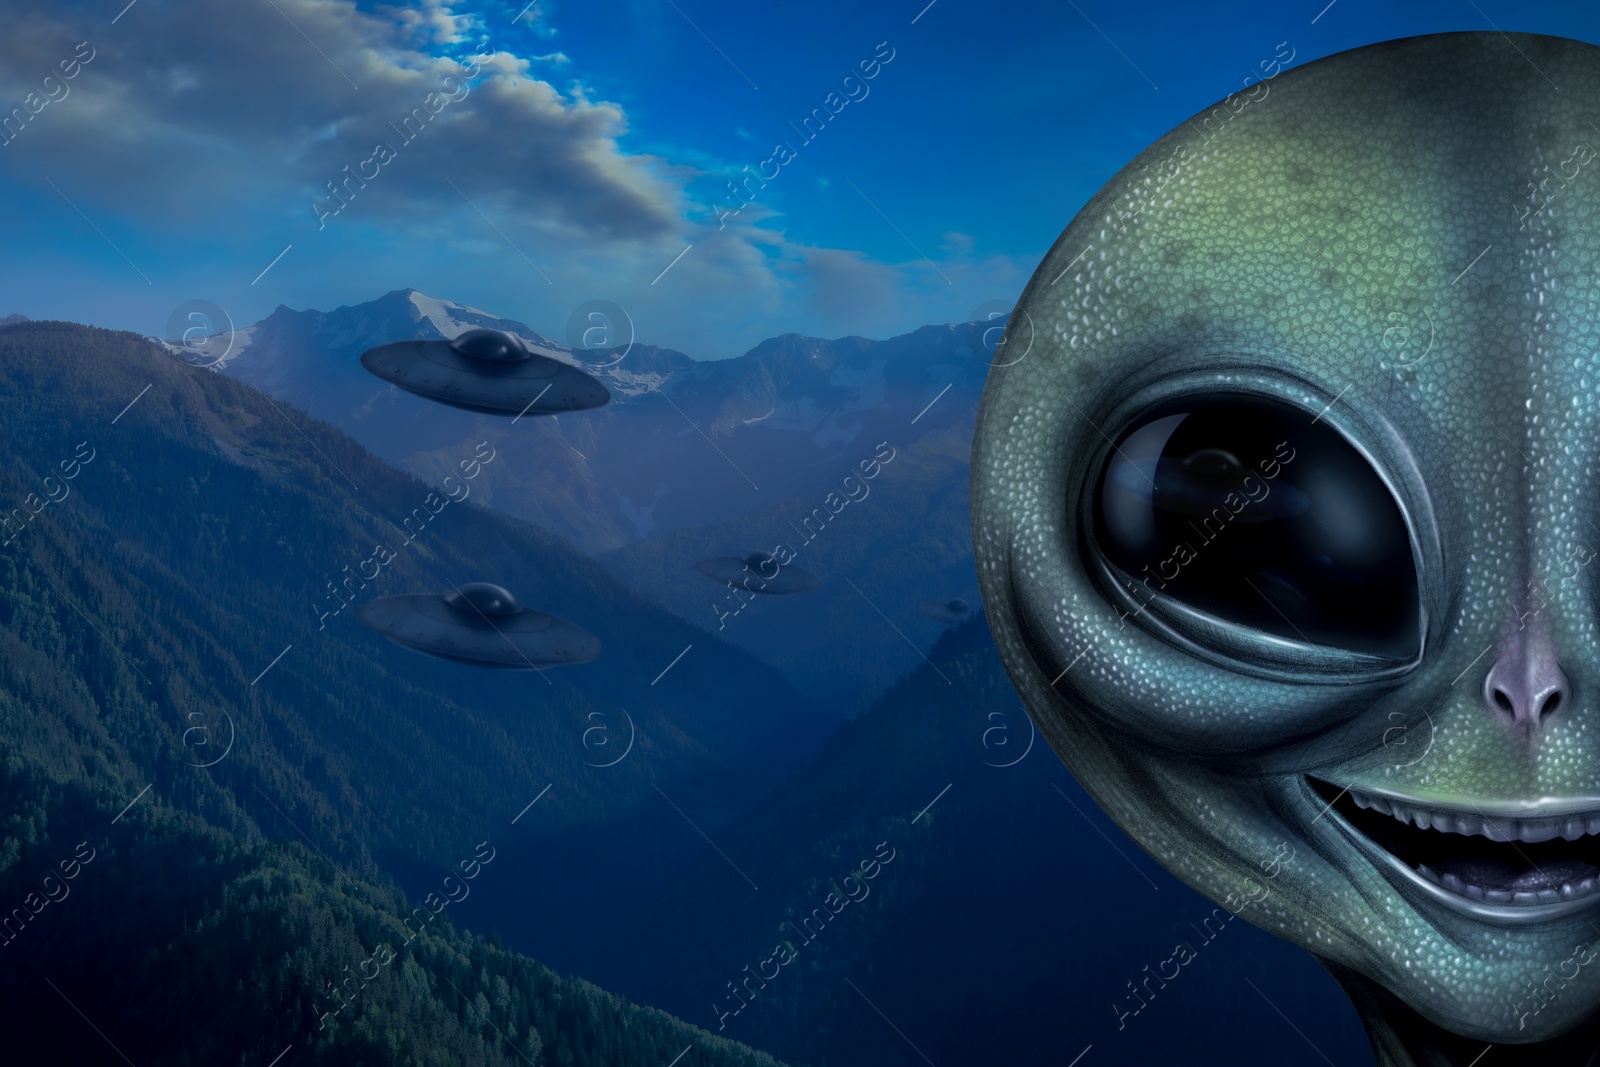 Image of Alien and flying saucers in mountains. UFO, extraterrestrial visitors